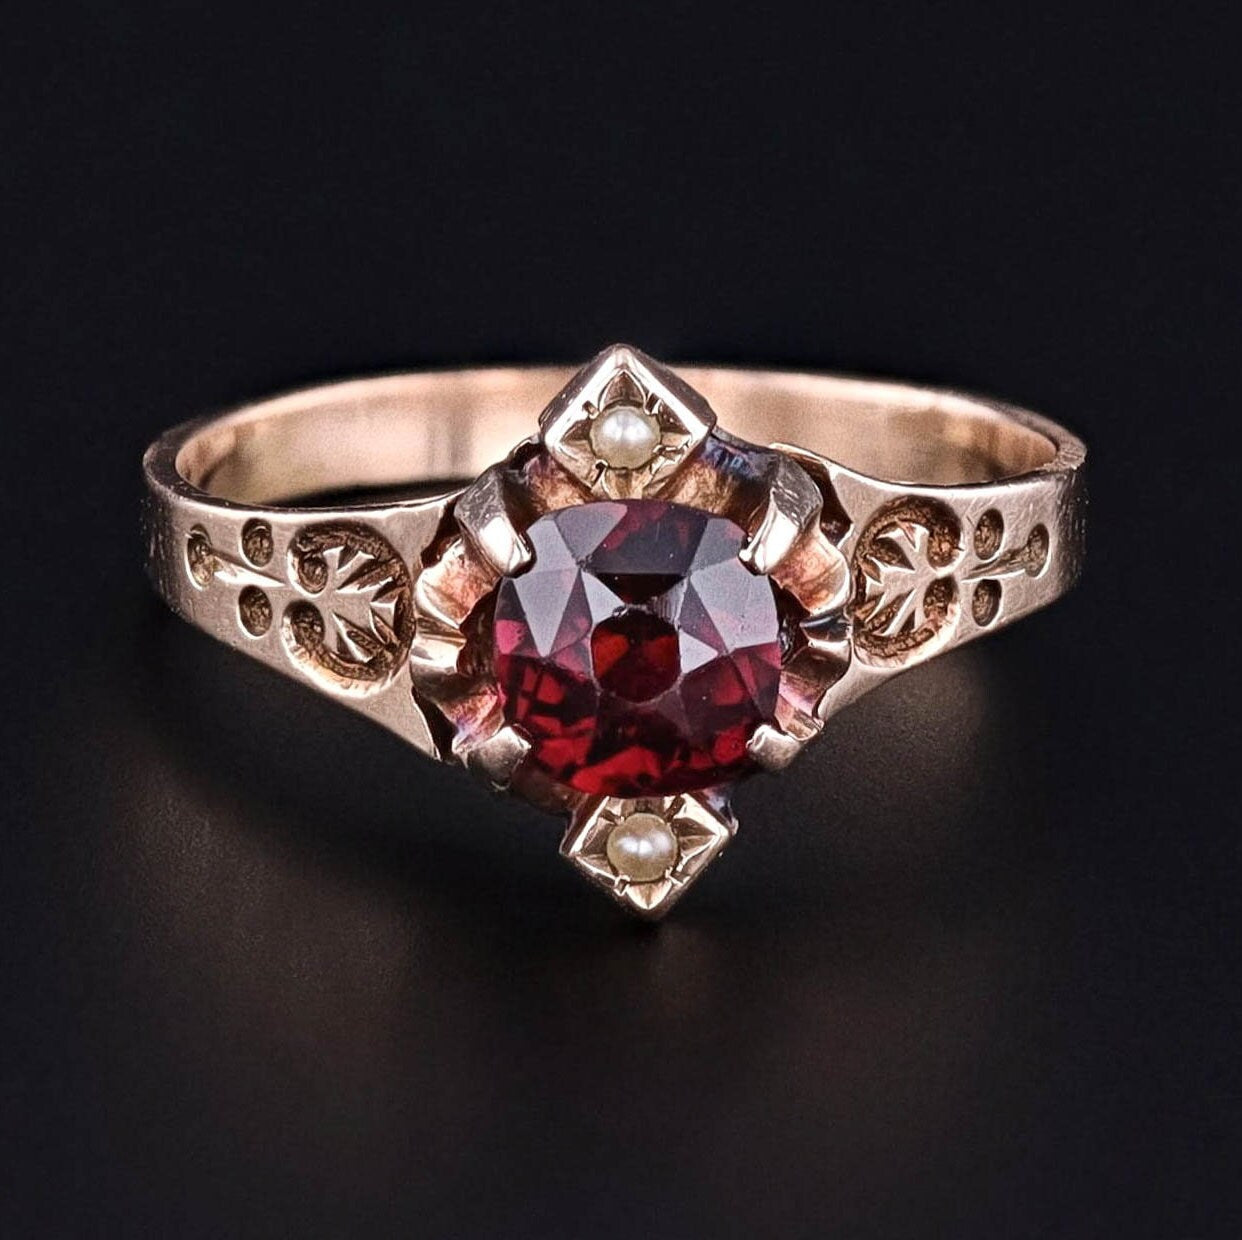 Antique Garnet and Pearl Ring of 10k Gold